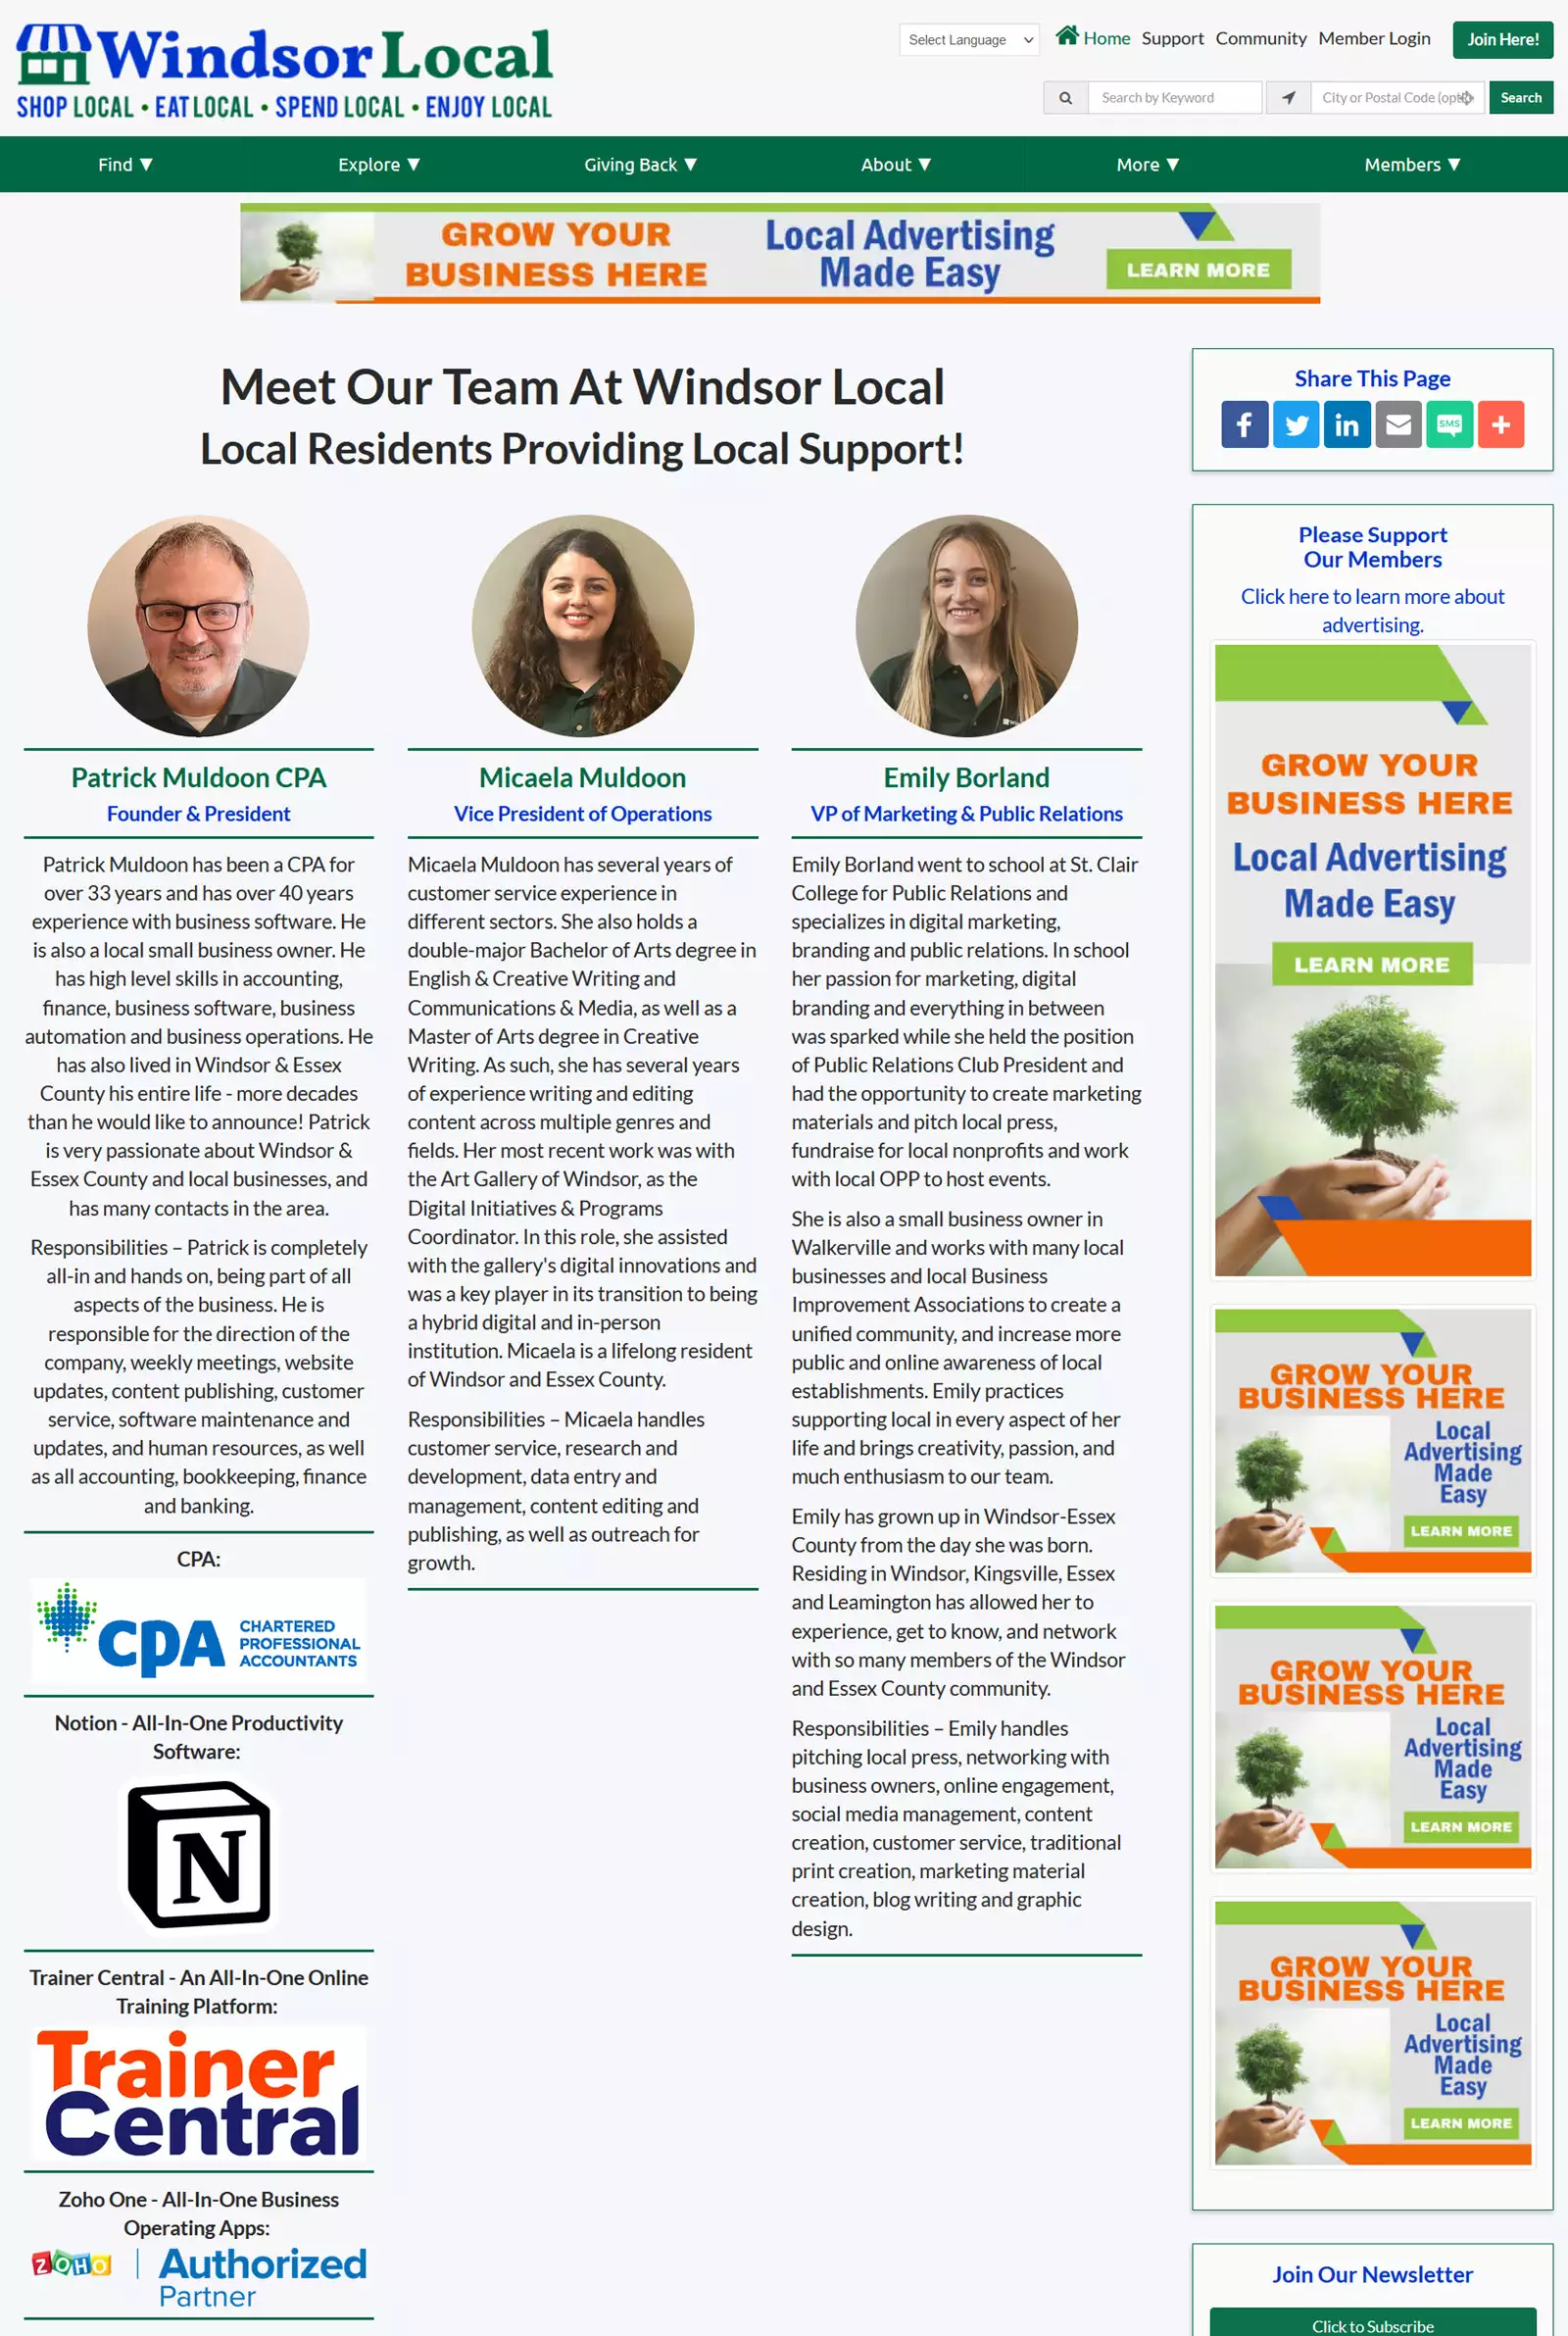 Windsor Local About - Our Team view